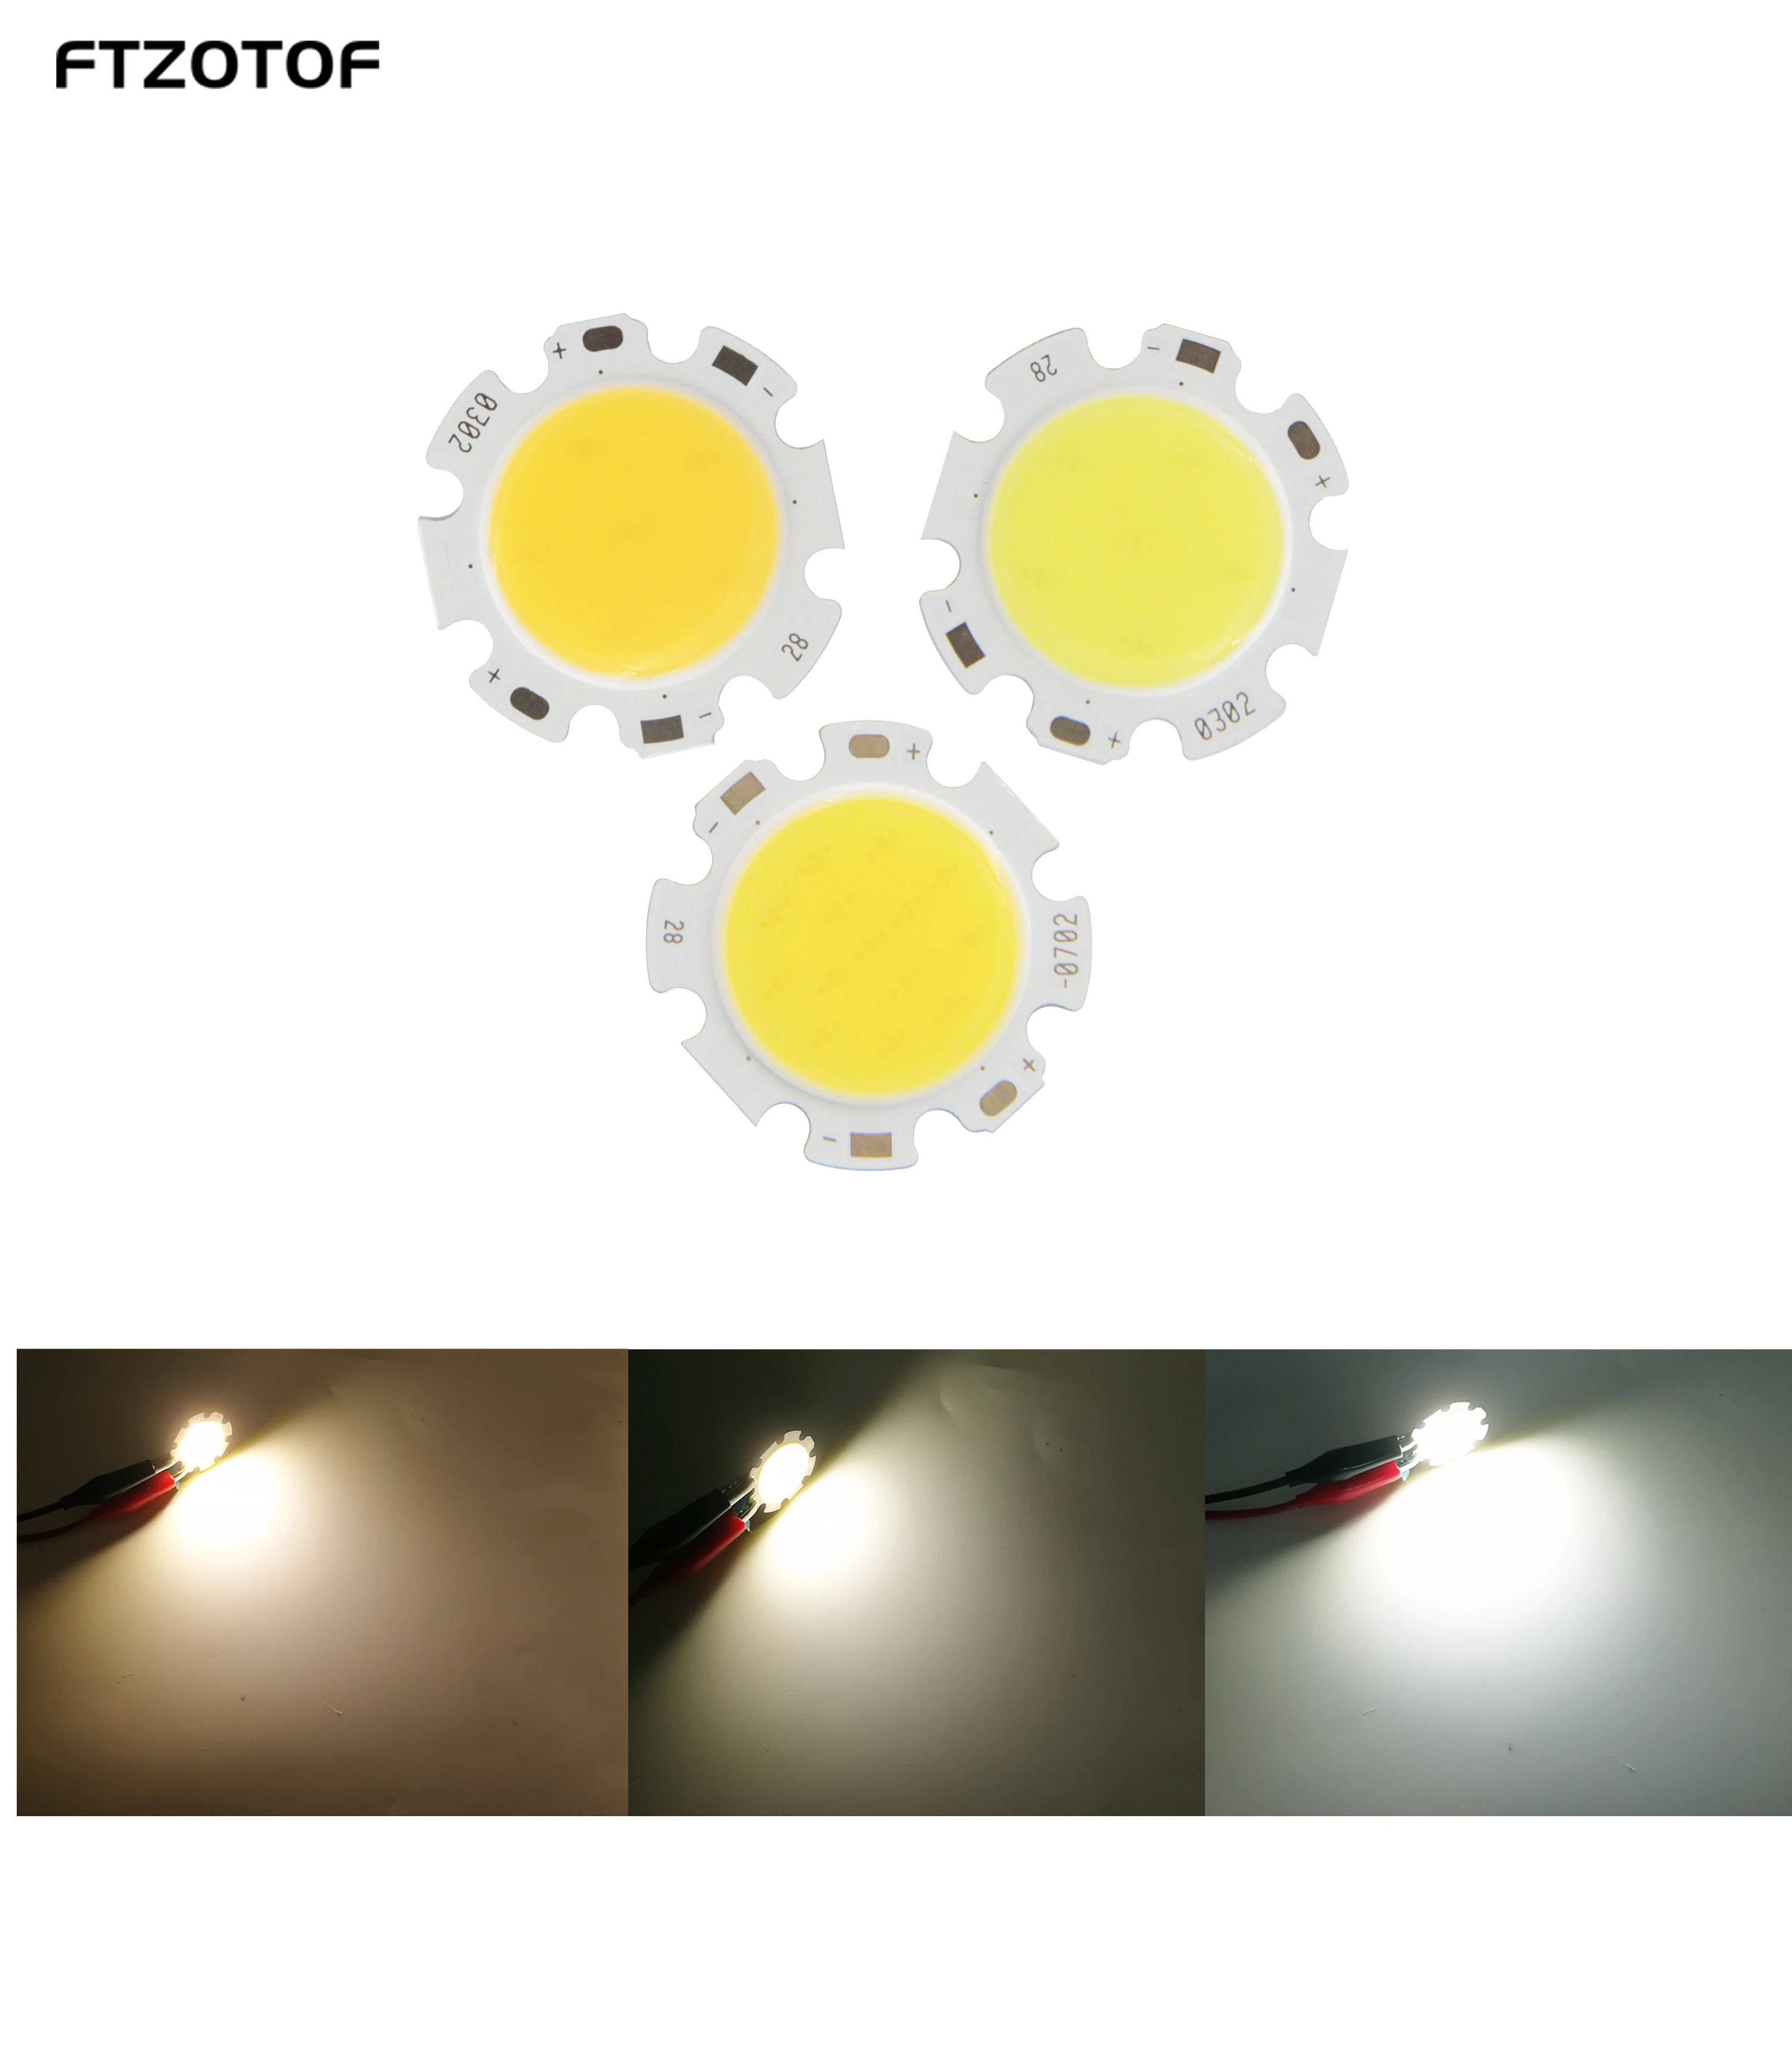 

10PCS 12W COB Light Source Rounded Chip On Board 28mm DC 36v-40V 1200LM Warm Cold White Bulbs for LED DIY Ceiling House Lamp